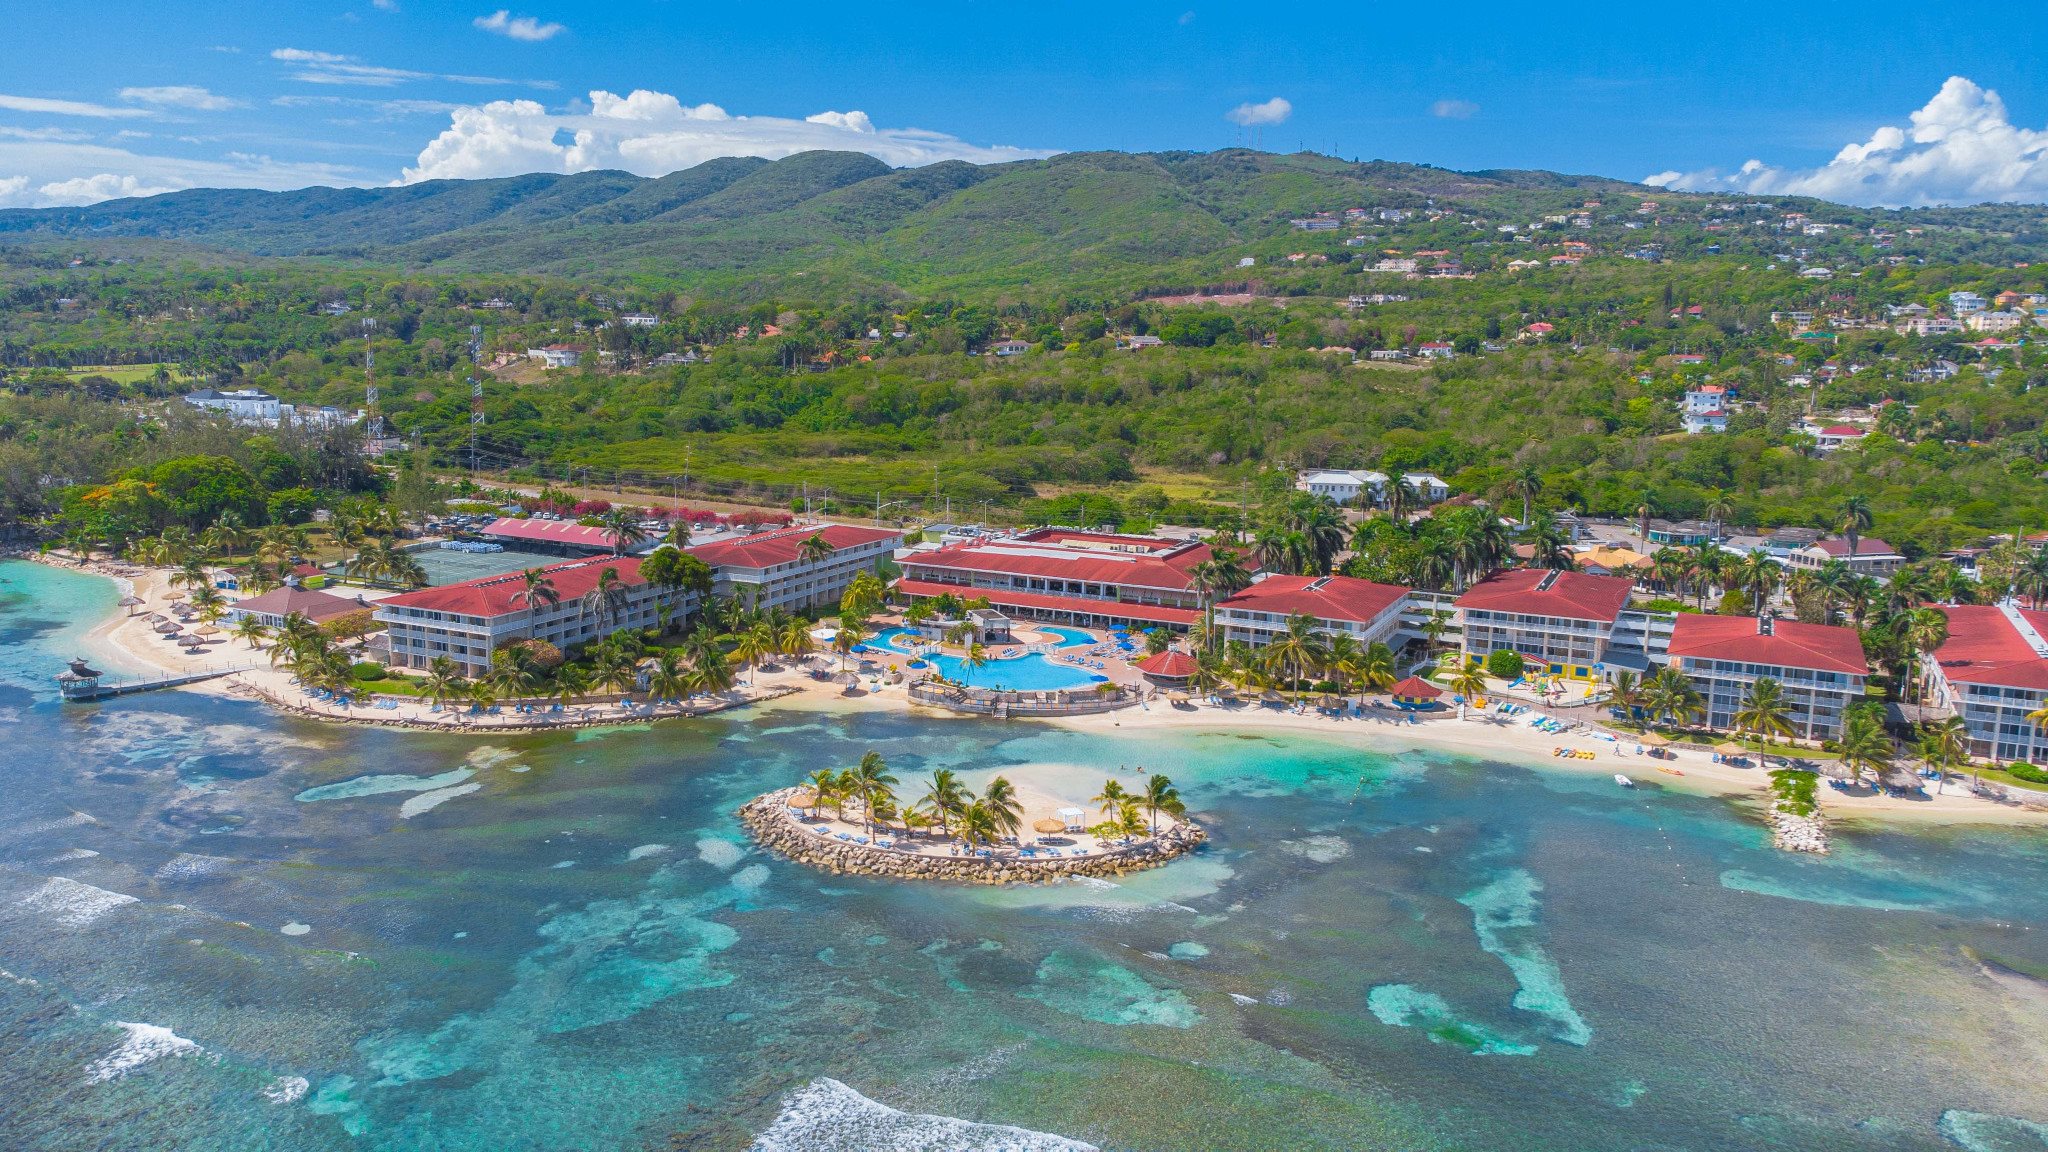 In Montego Bay, Jamaica, a New Kind of All-Inclusive Vacation